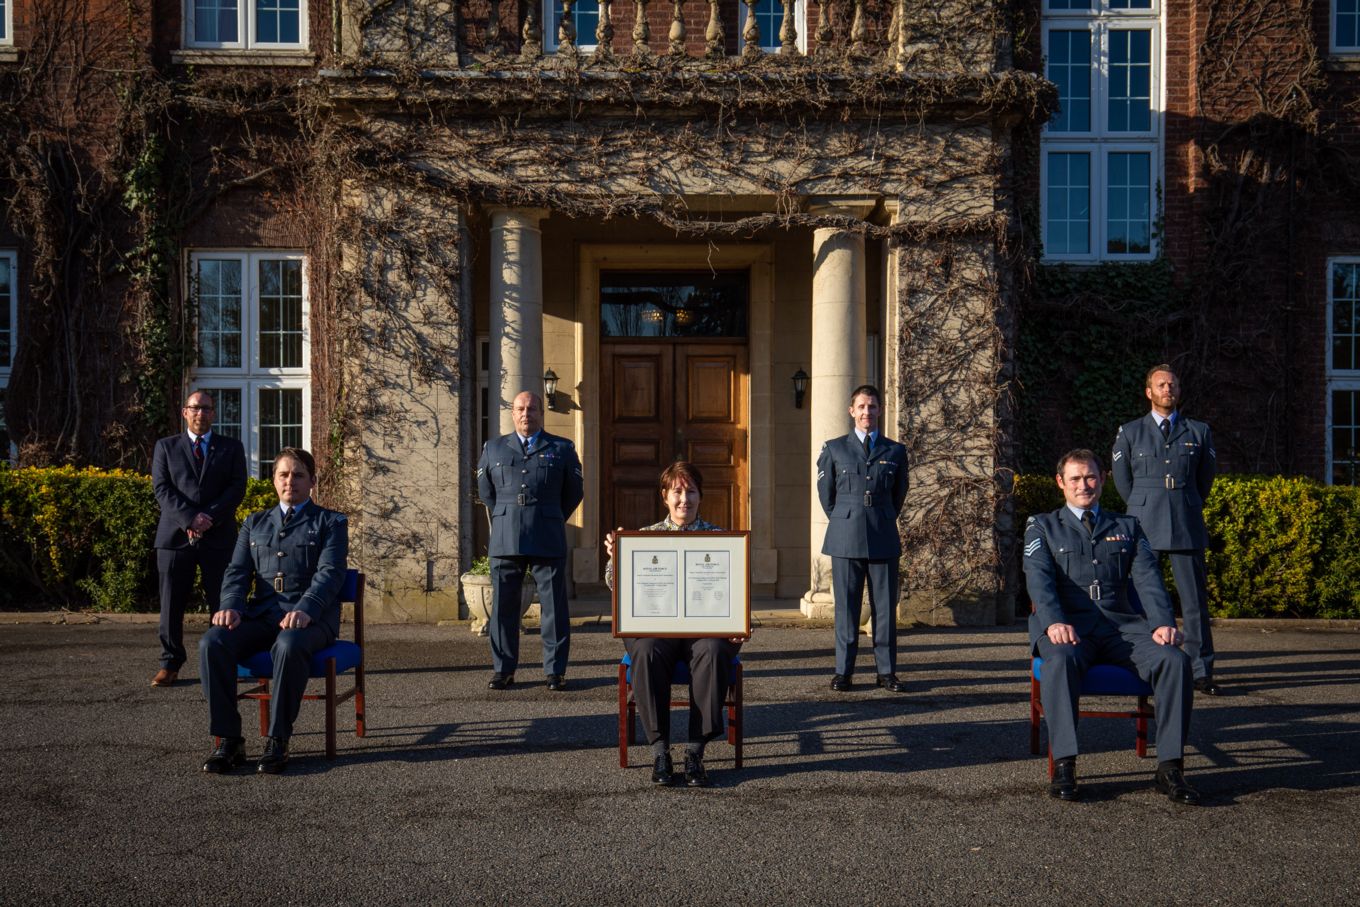 From left to right: Mr Paul Coles, Flt Lt Mike Hampton (seated), Cpl Richard Clarke, Ms Ali Fruin (seated), Cpl Jon Roberts, Sgt Darren Pipe (seated), Cpl Shane Winfield